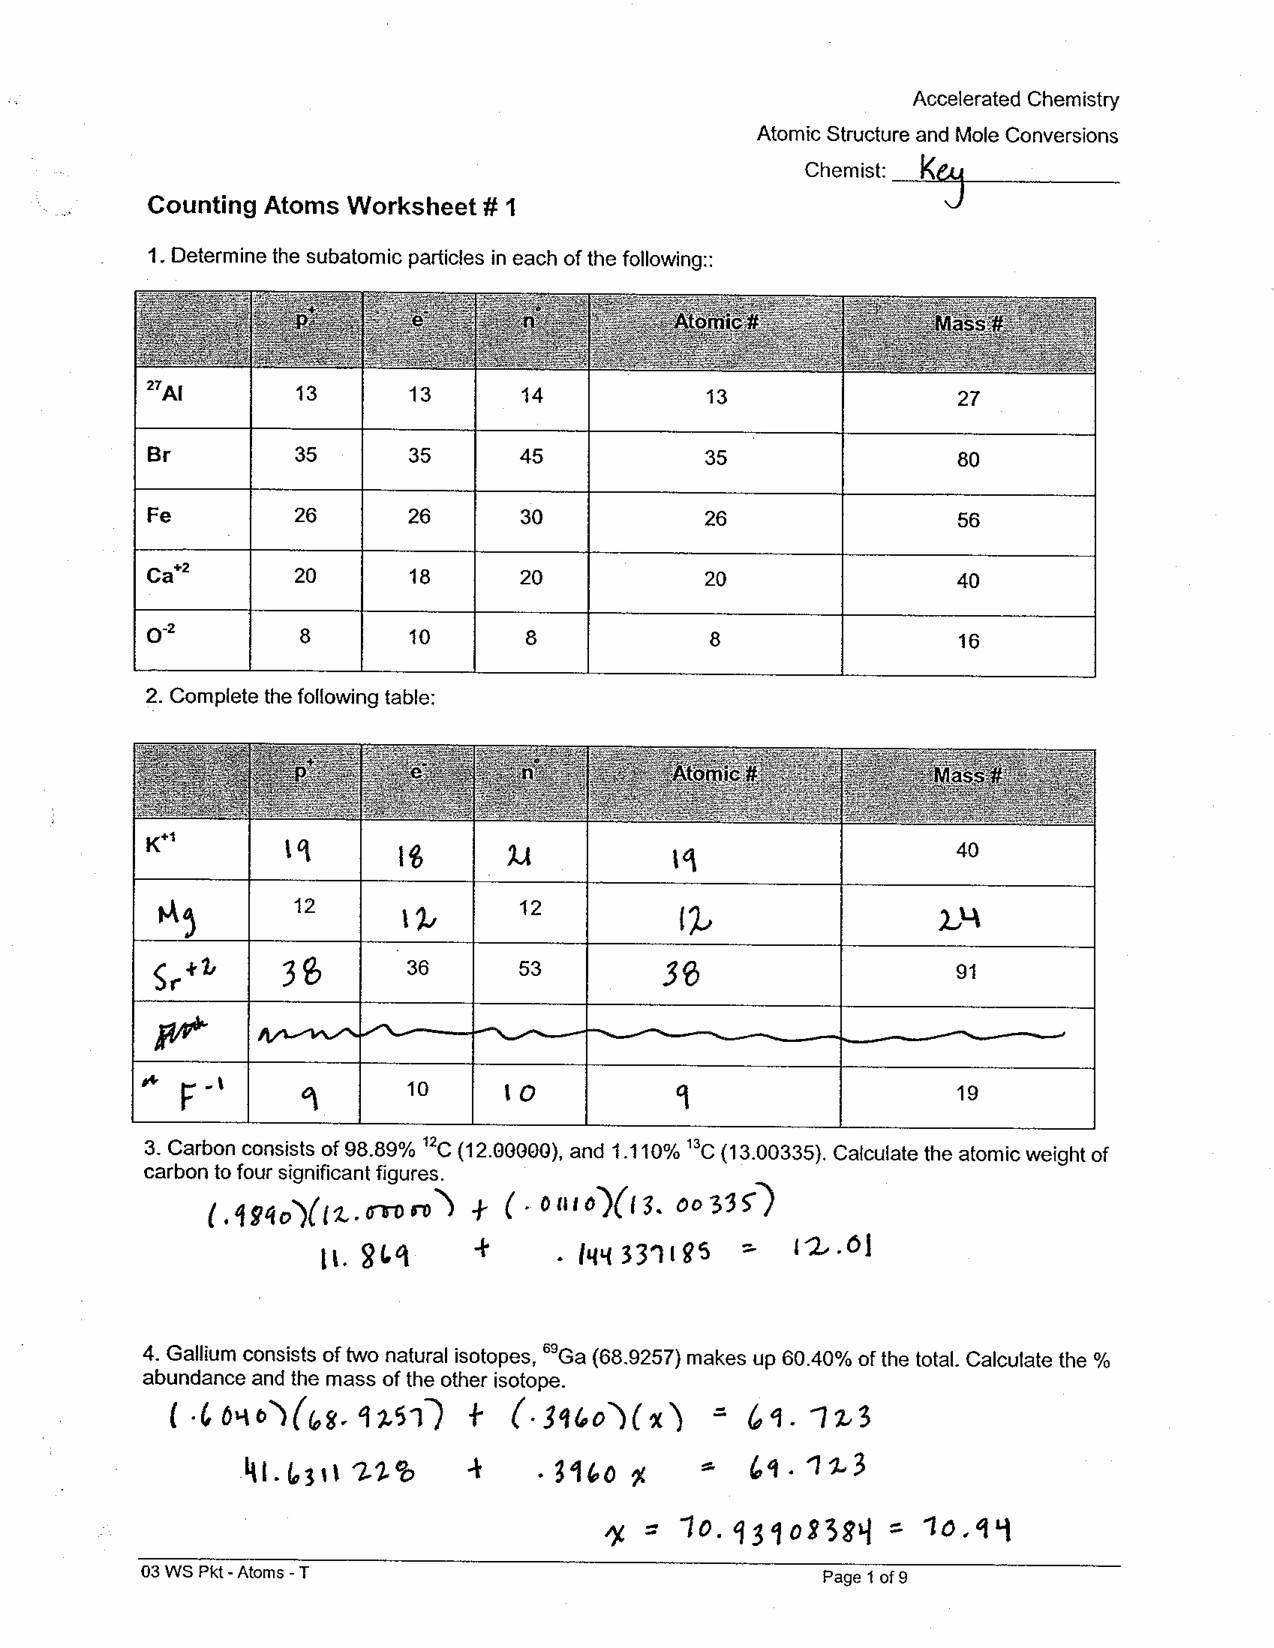 Atoms Vs Ions Worksheet atoms Molecules and Ions Worksheet Answers Search